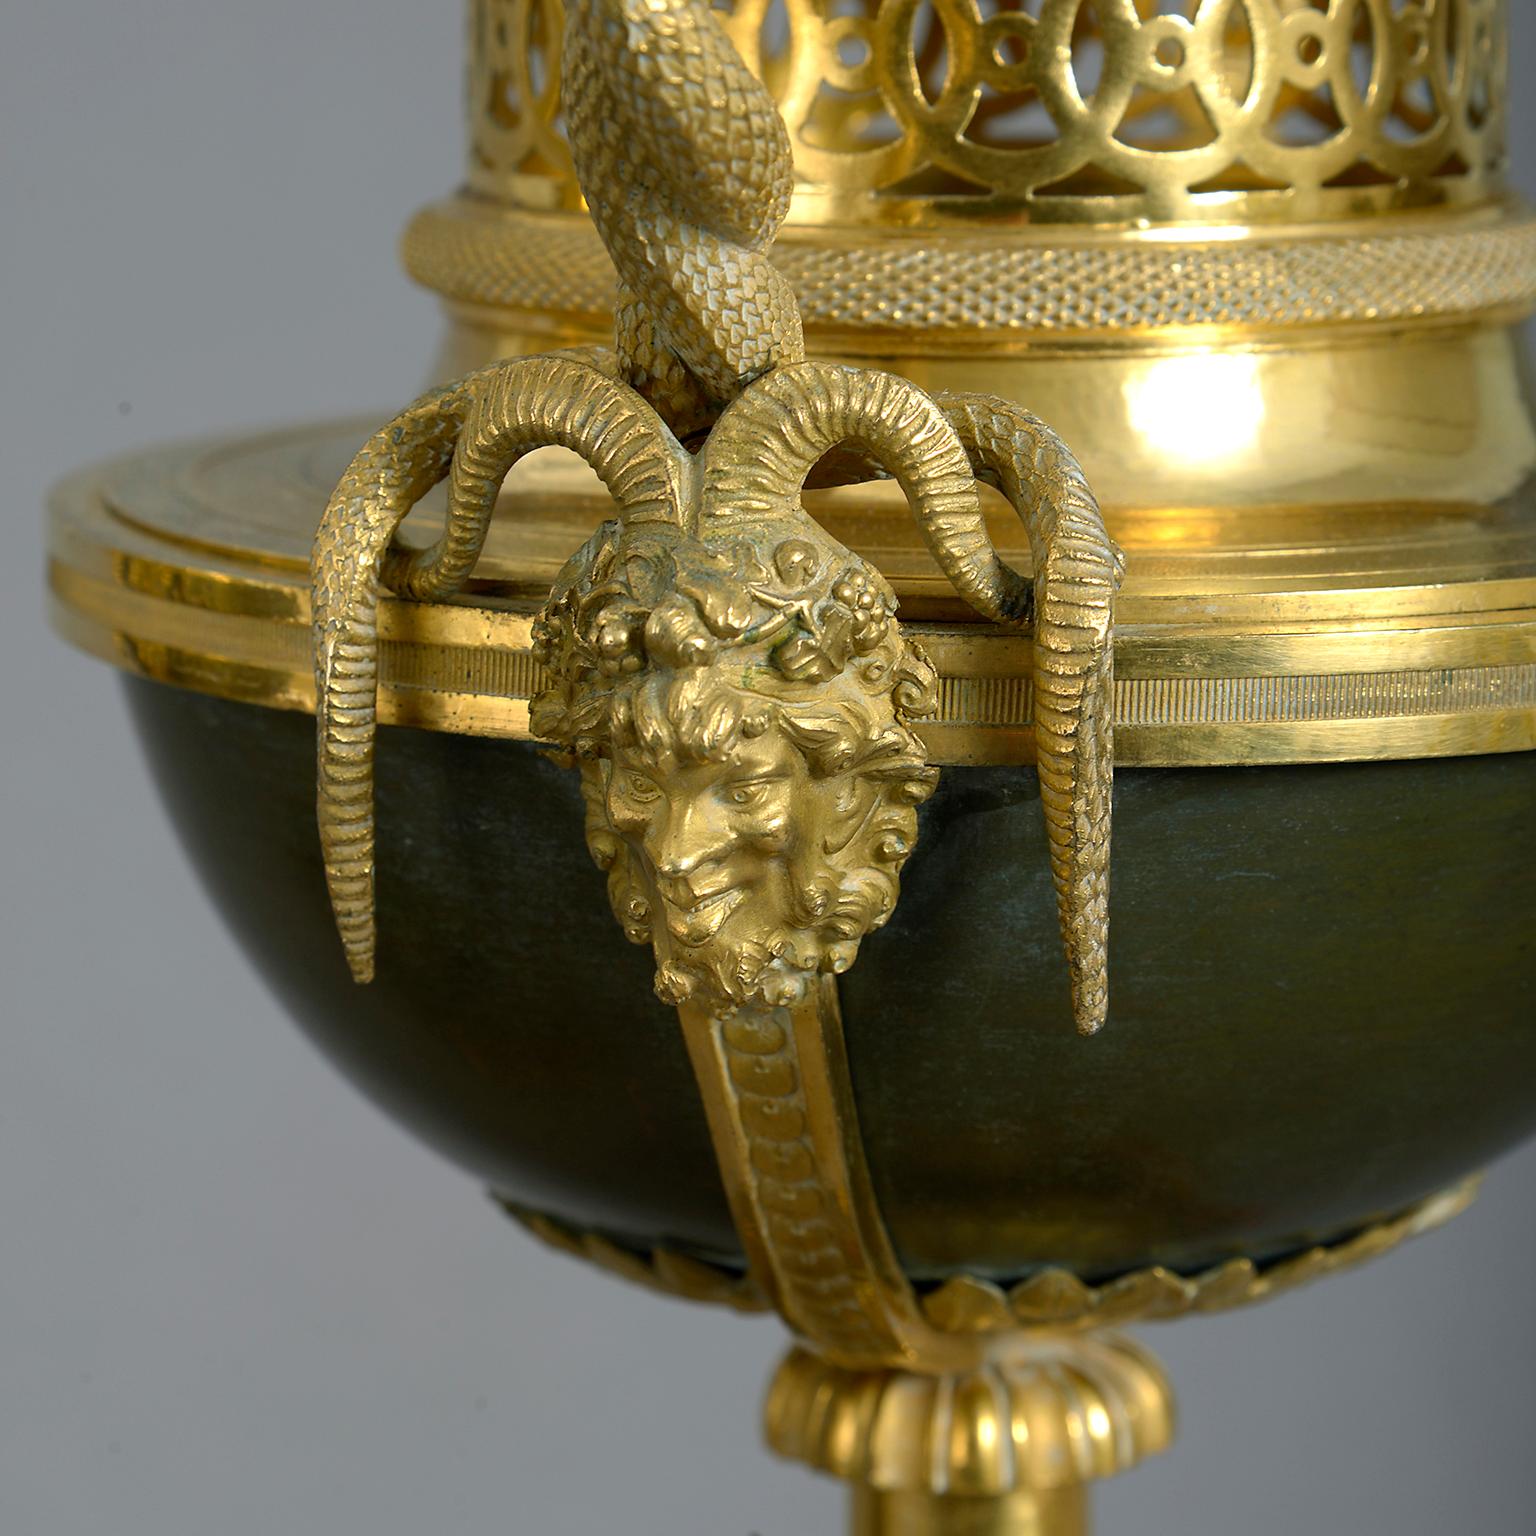 Gilt Early 19th Century Pair of Bronze and Ormolu Perfume Burners or Pot-Pourri Vases